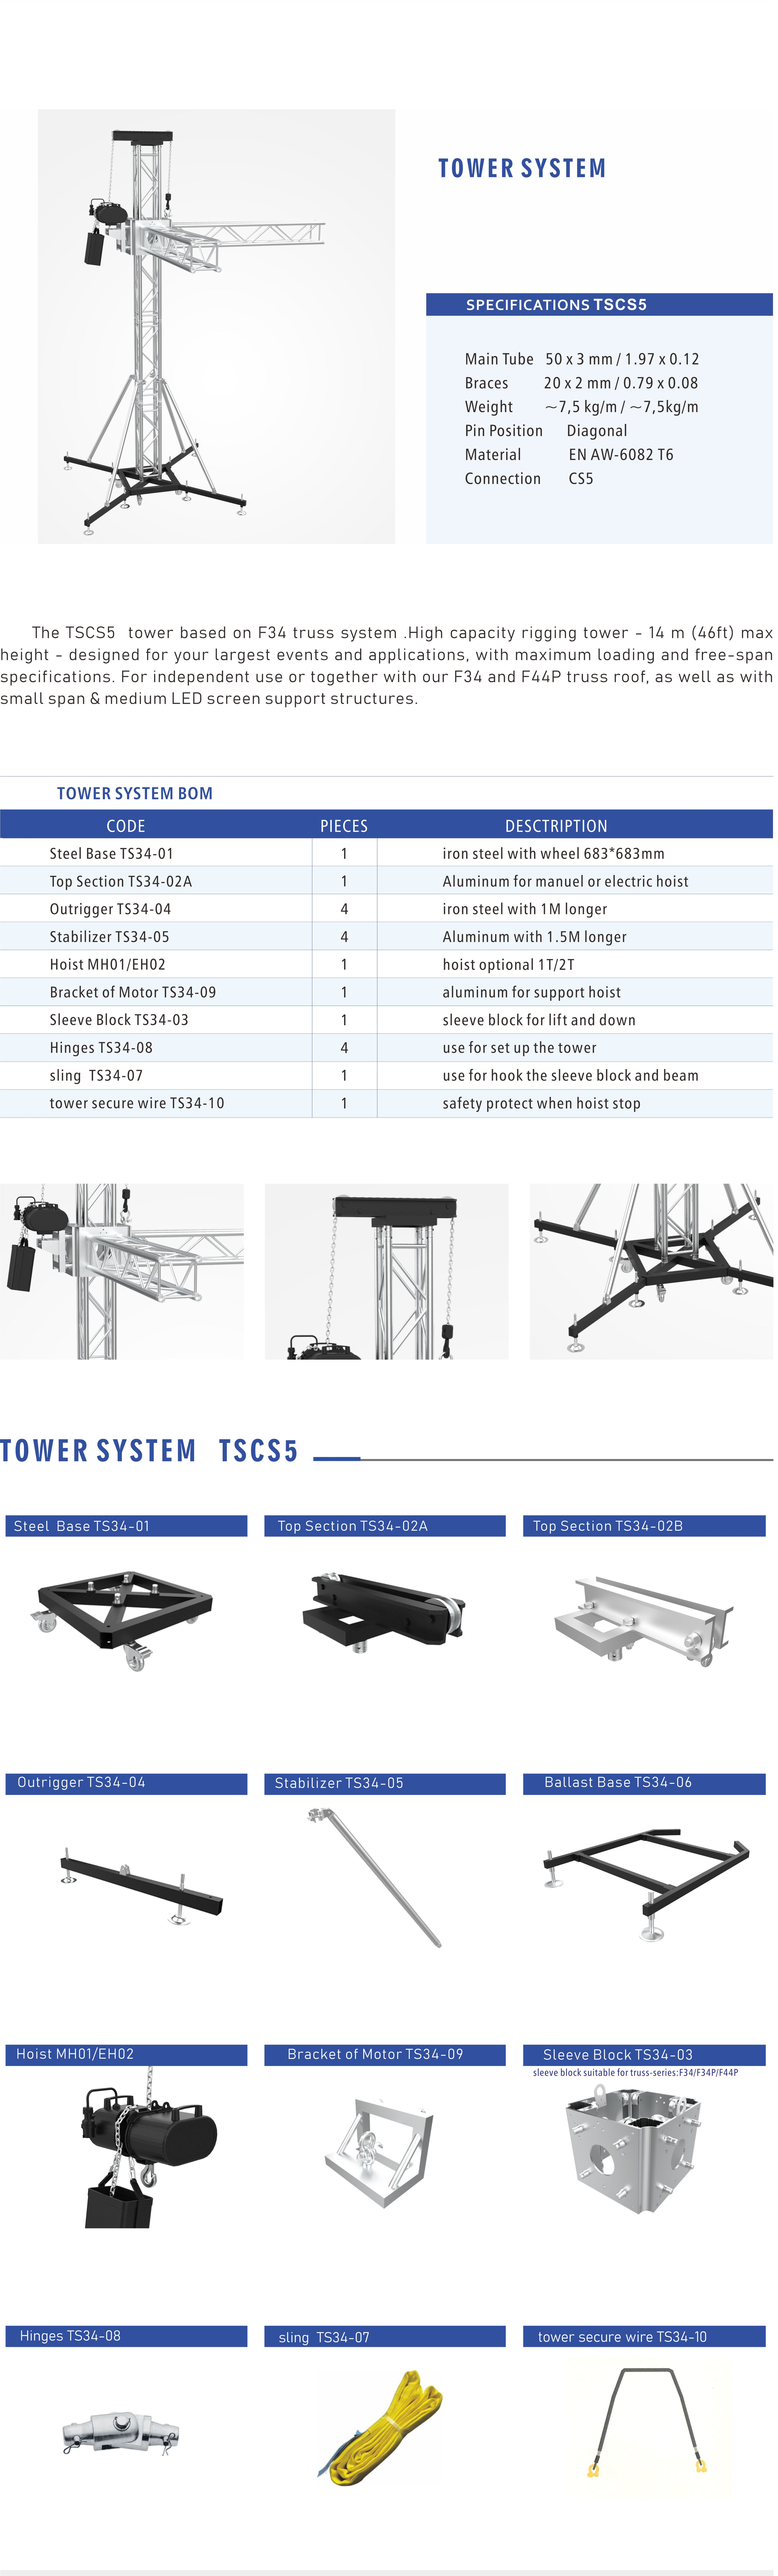 TOWER SYSTEM TSCS5 